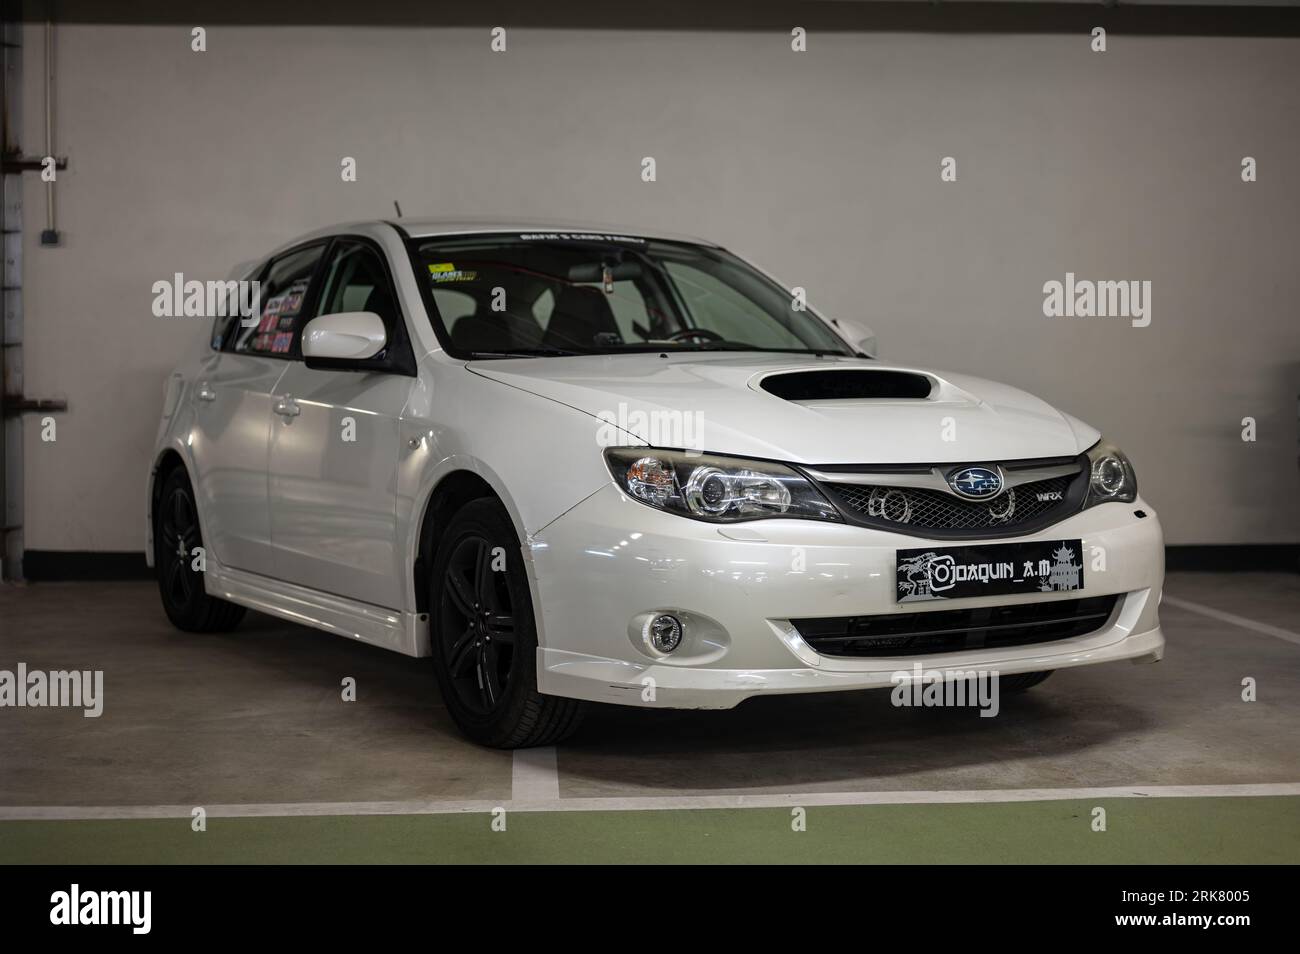 Front view of a Japanese all-wheel drive rally sports car, oclor white third generation Subaru Impreza WRX parked in an indoor parking lot Stock Photo